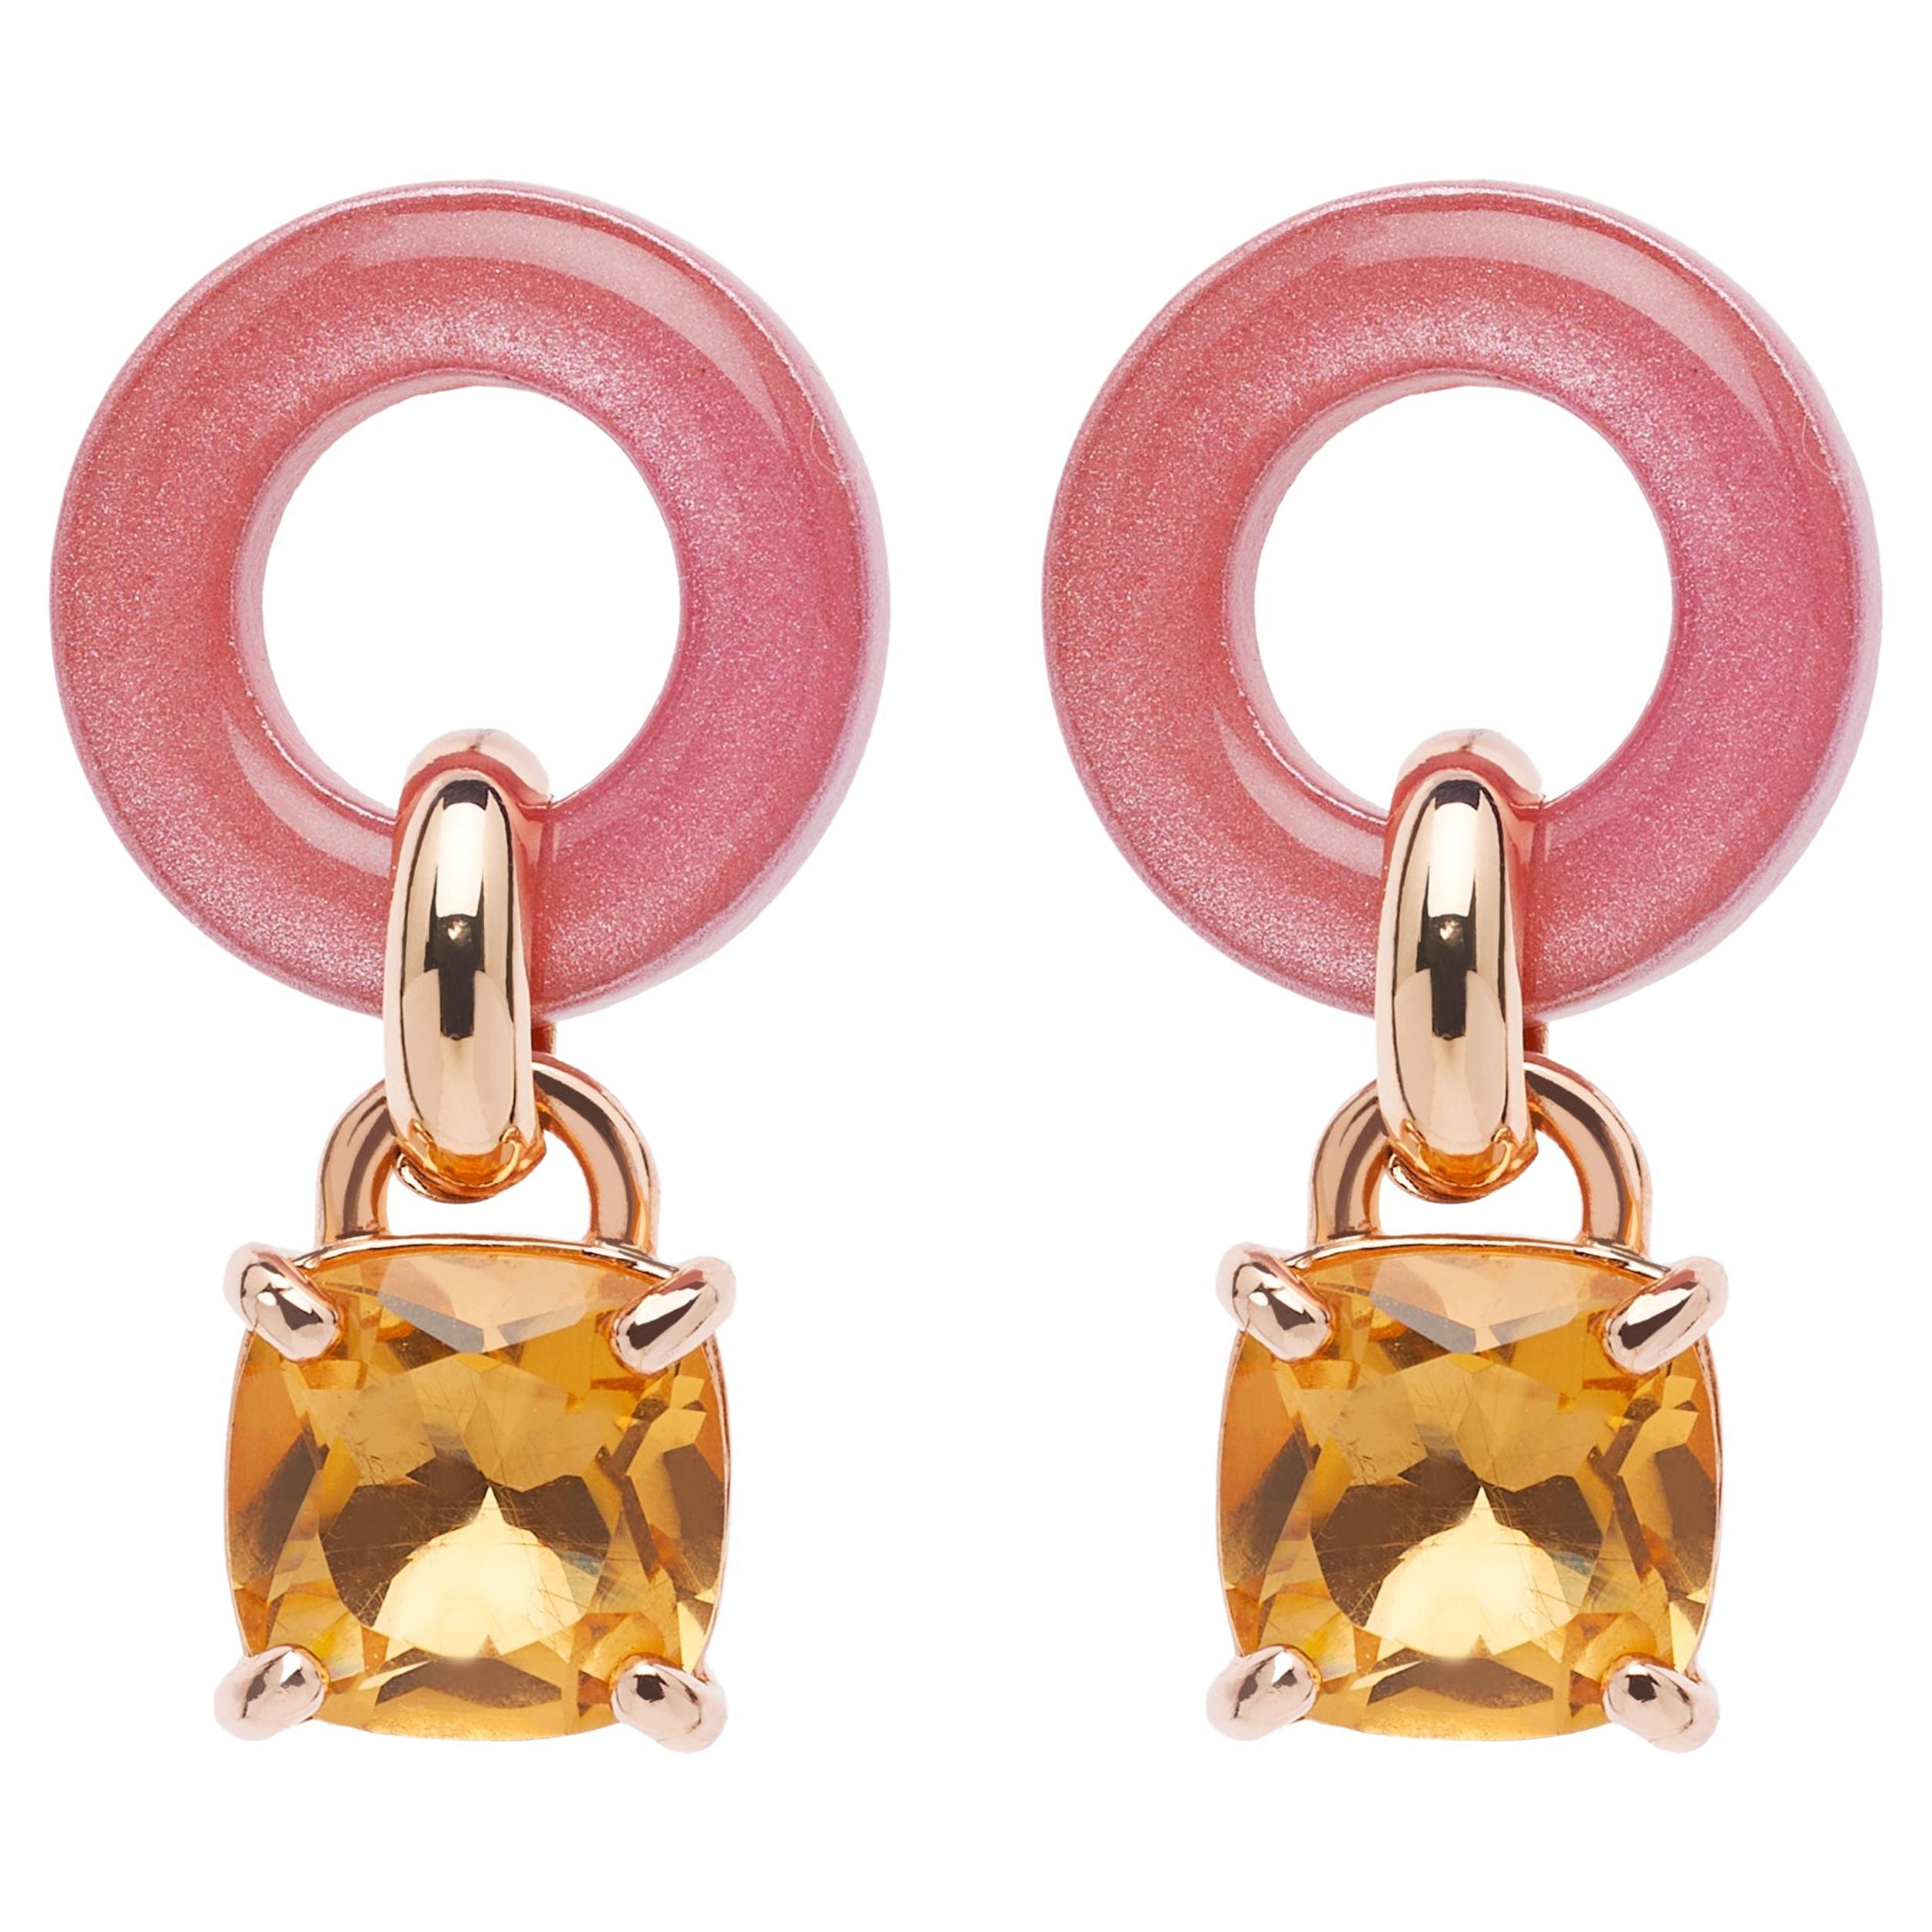 Rossoprezioso Stud Earrings in Lacquered and Enameled Wood + Quartz Cushion Cut